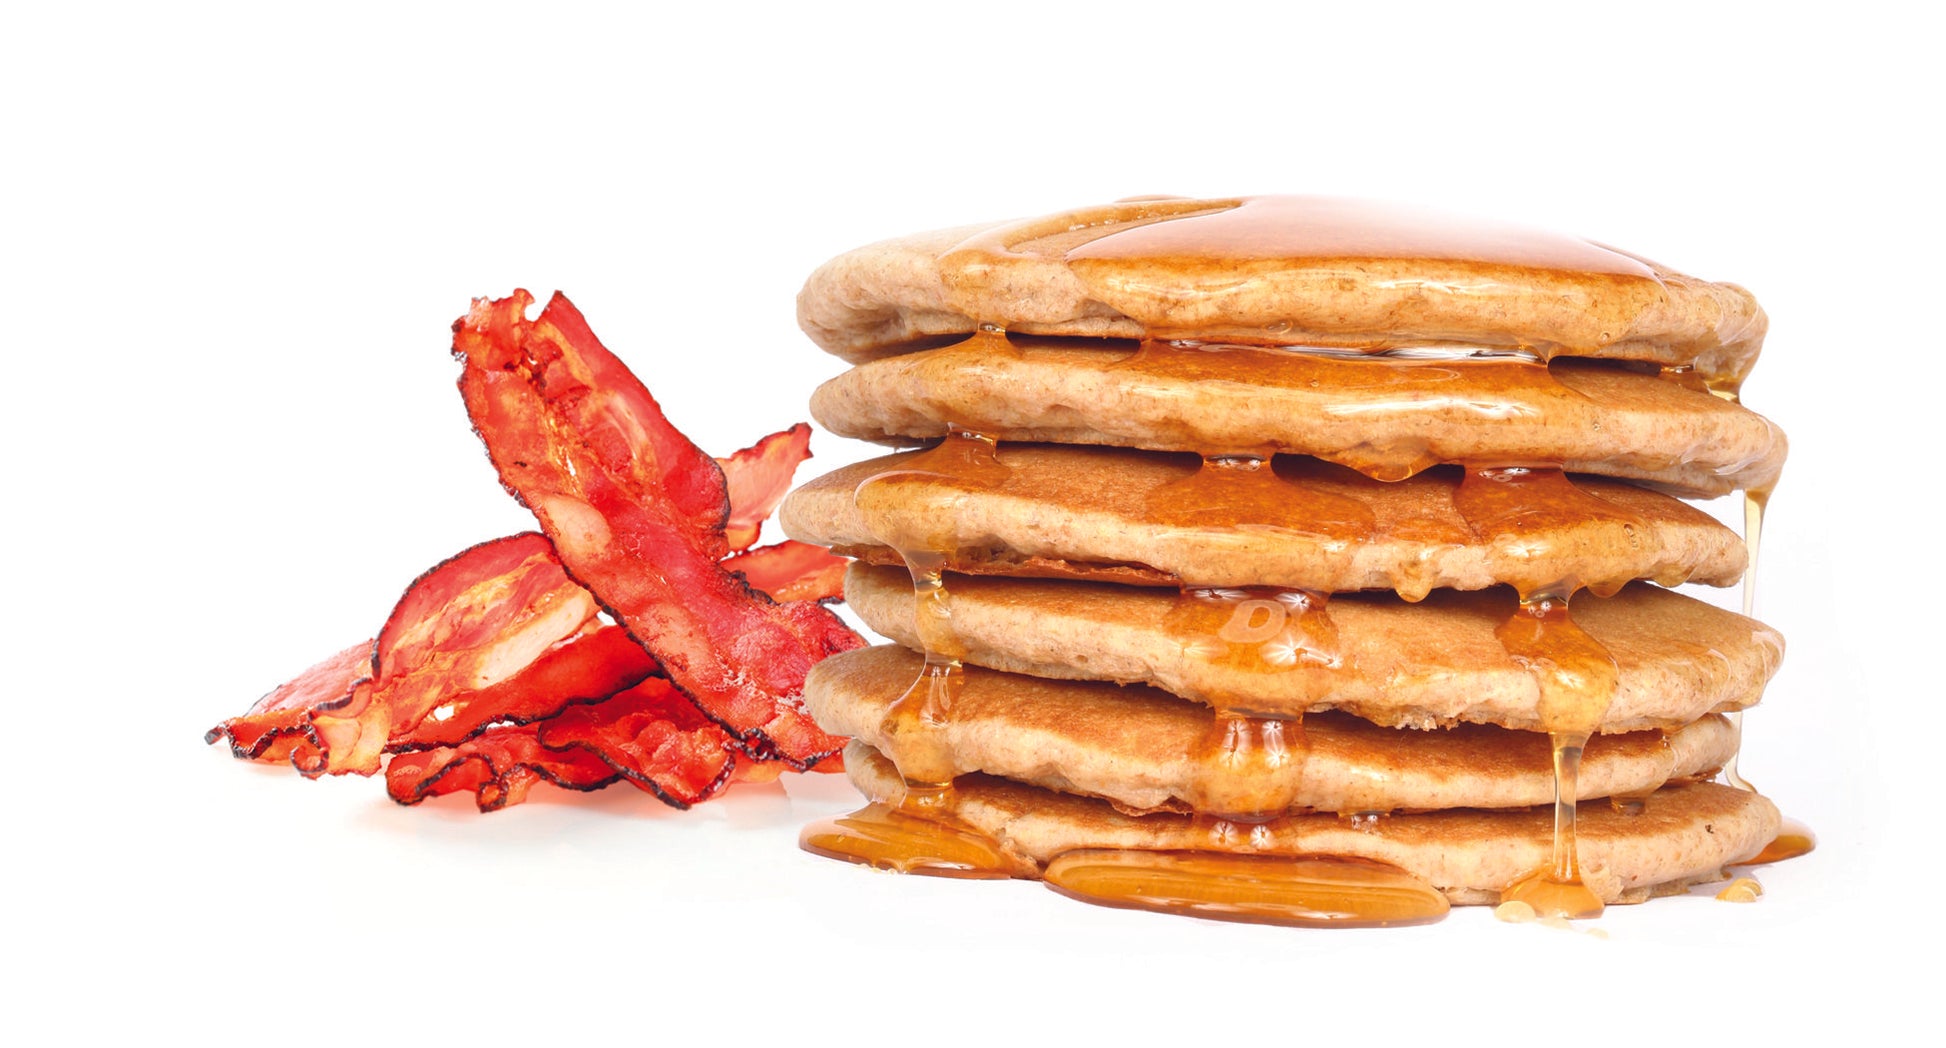 JoJé Pancakes and Bacon Bar ingredients: pancakes with syrup and bacon